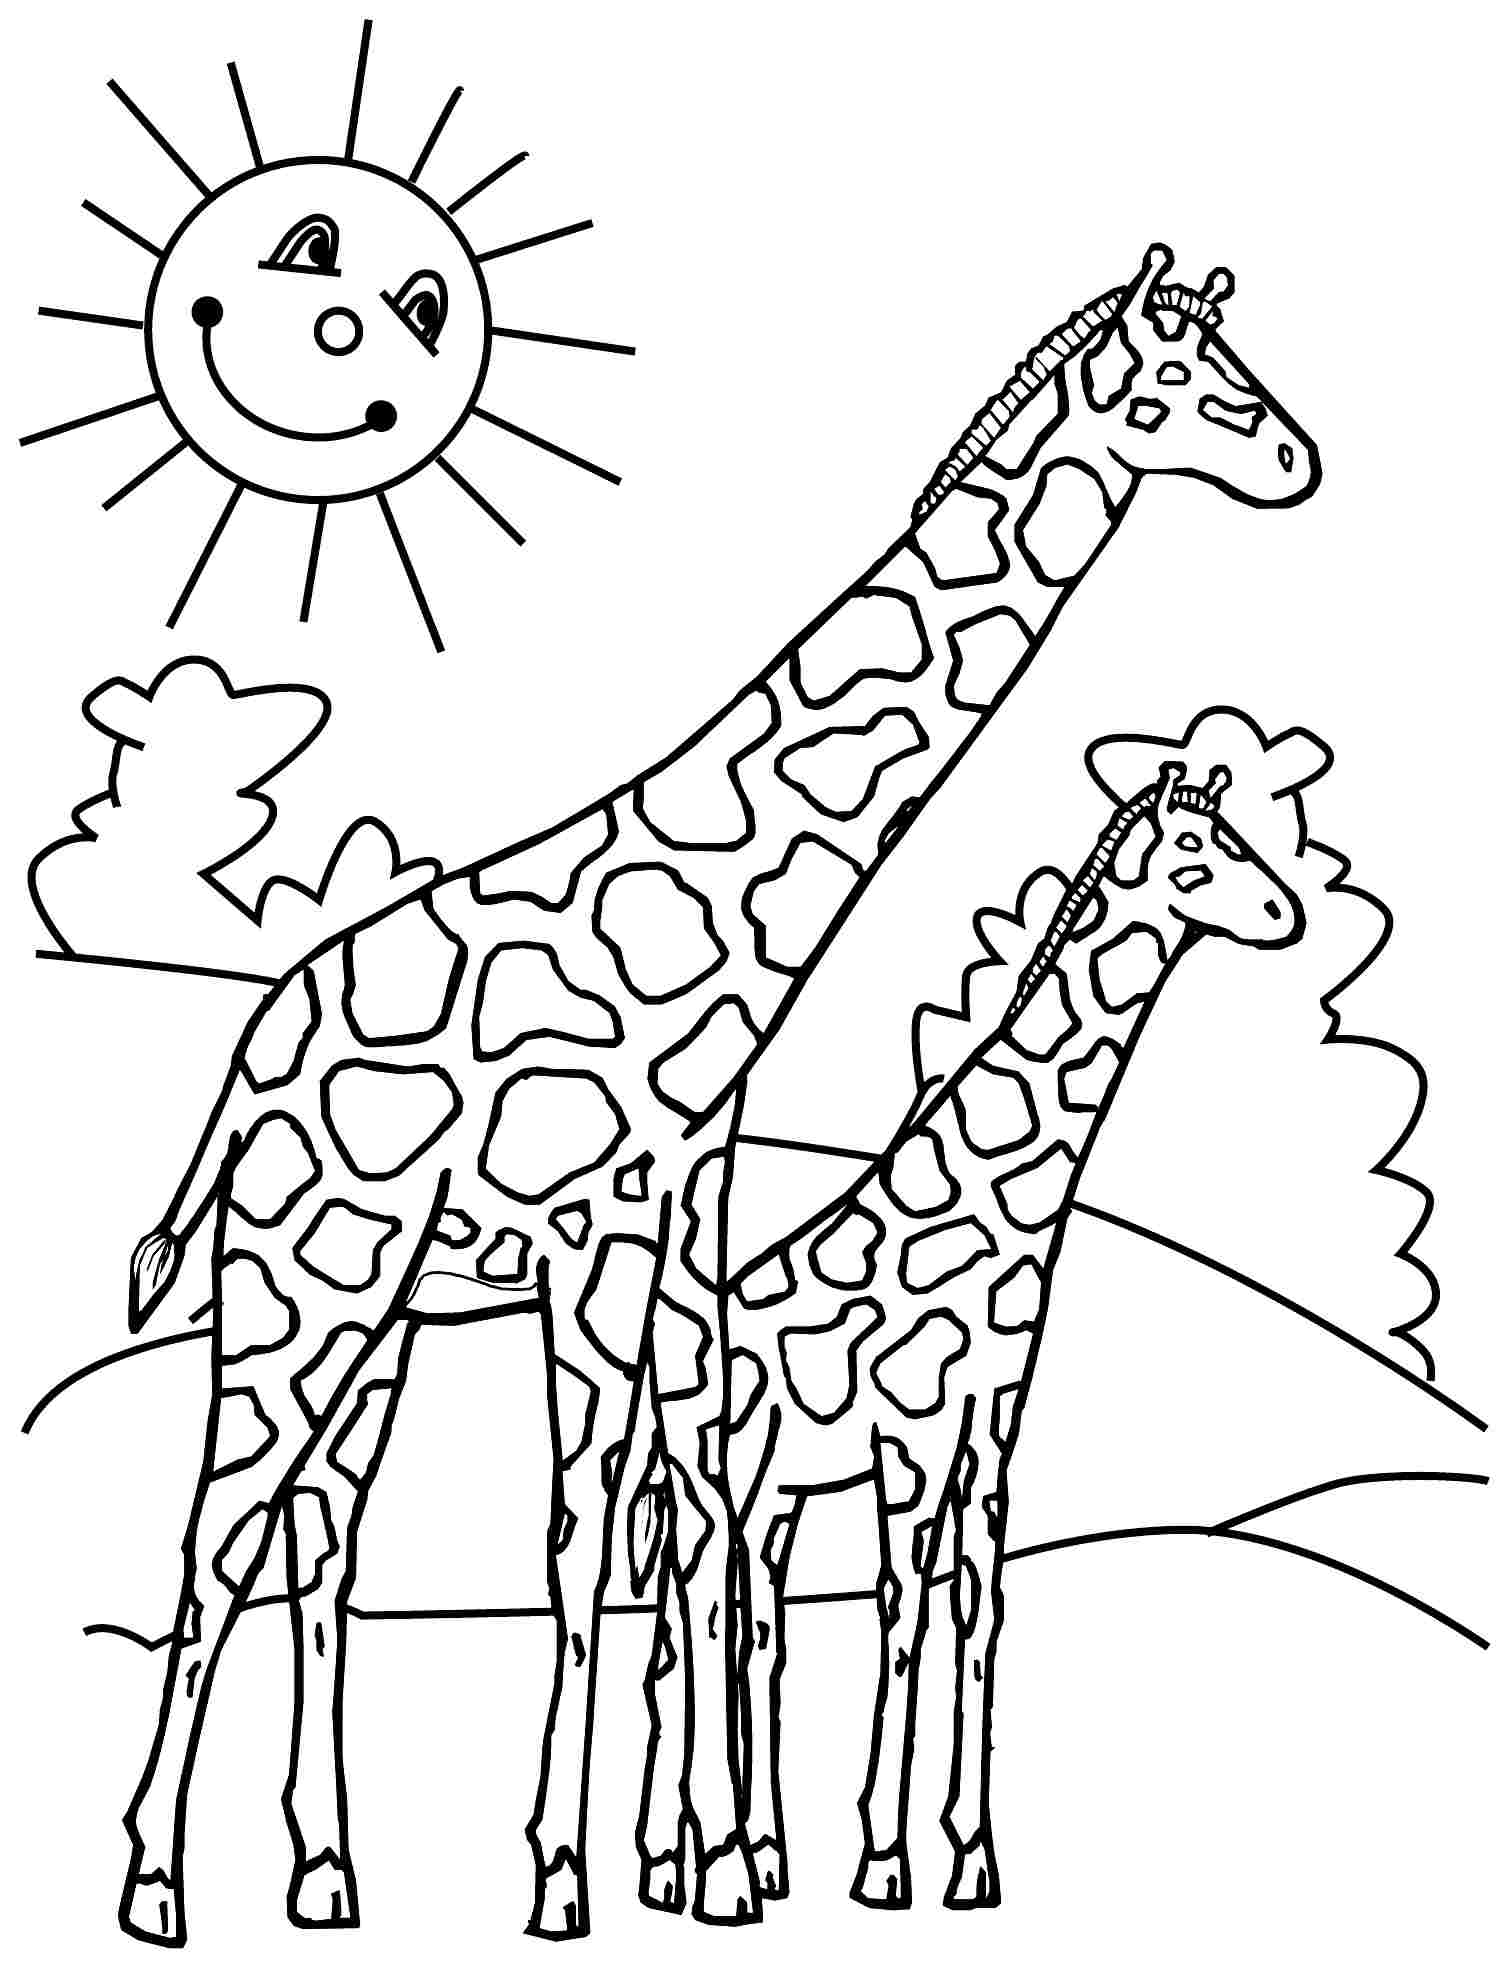 Africa Coloring Pages - Best Coloring Pages For Kids